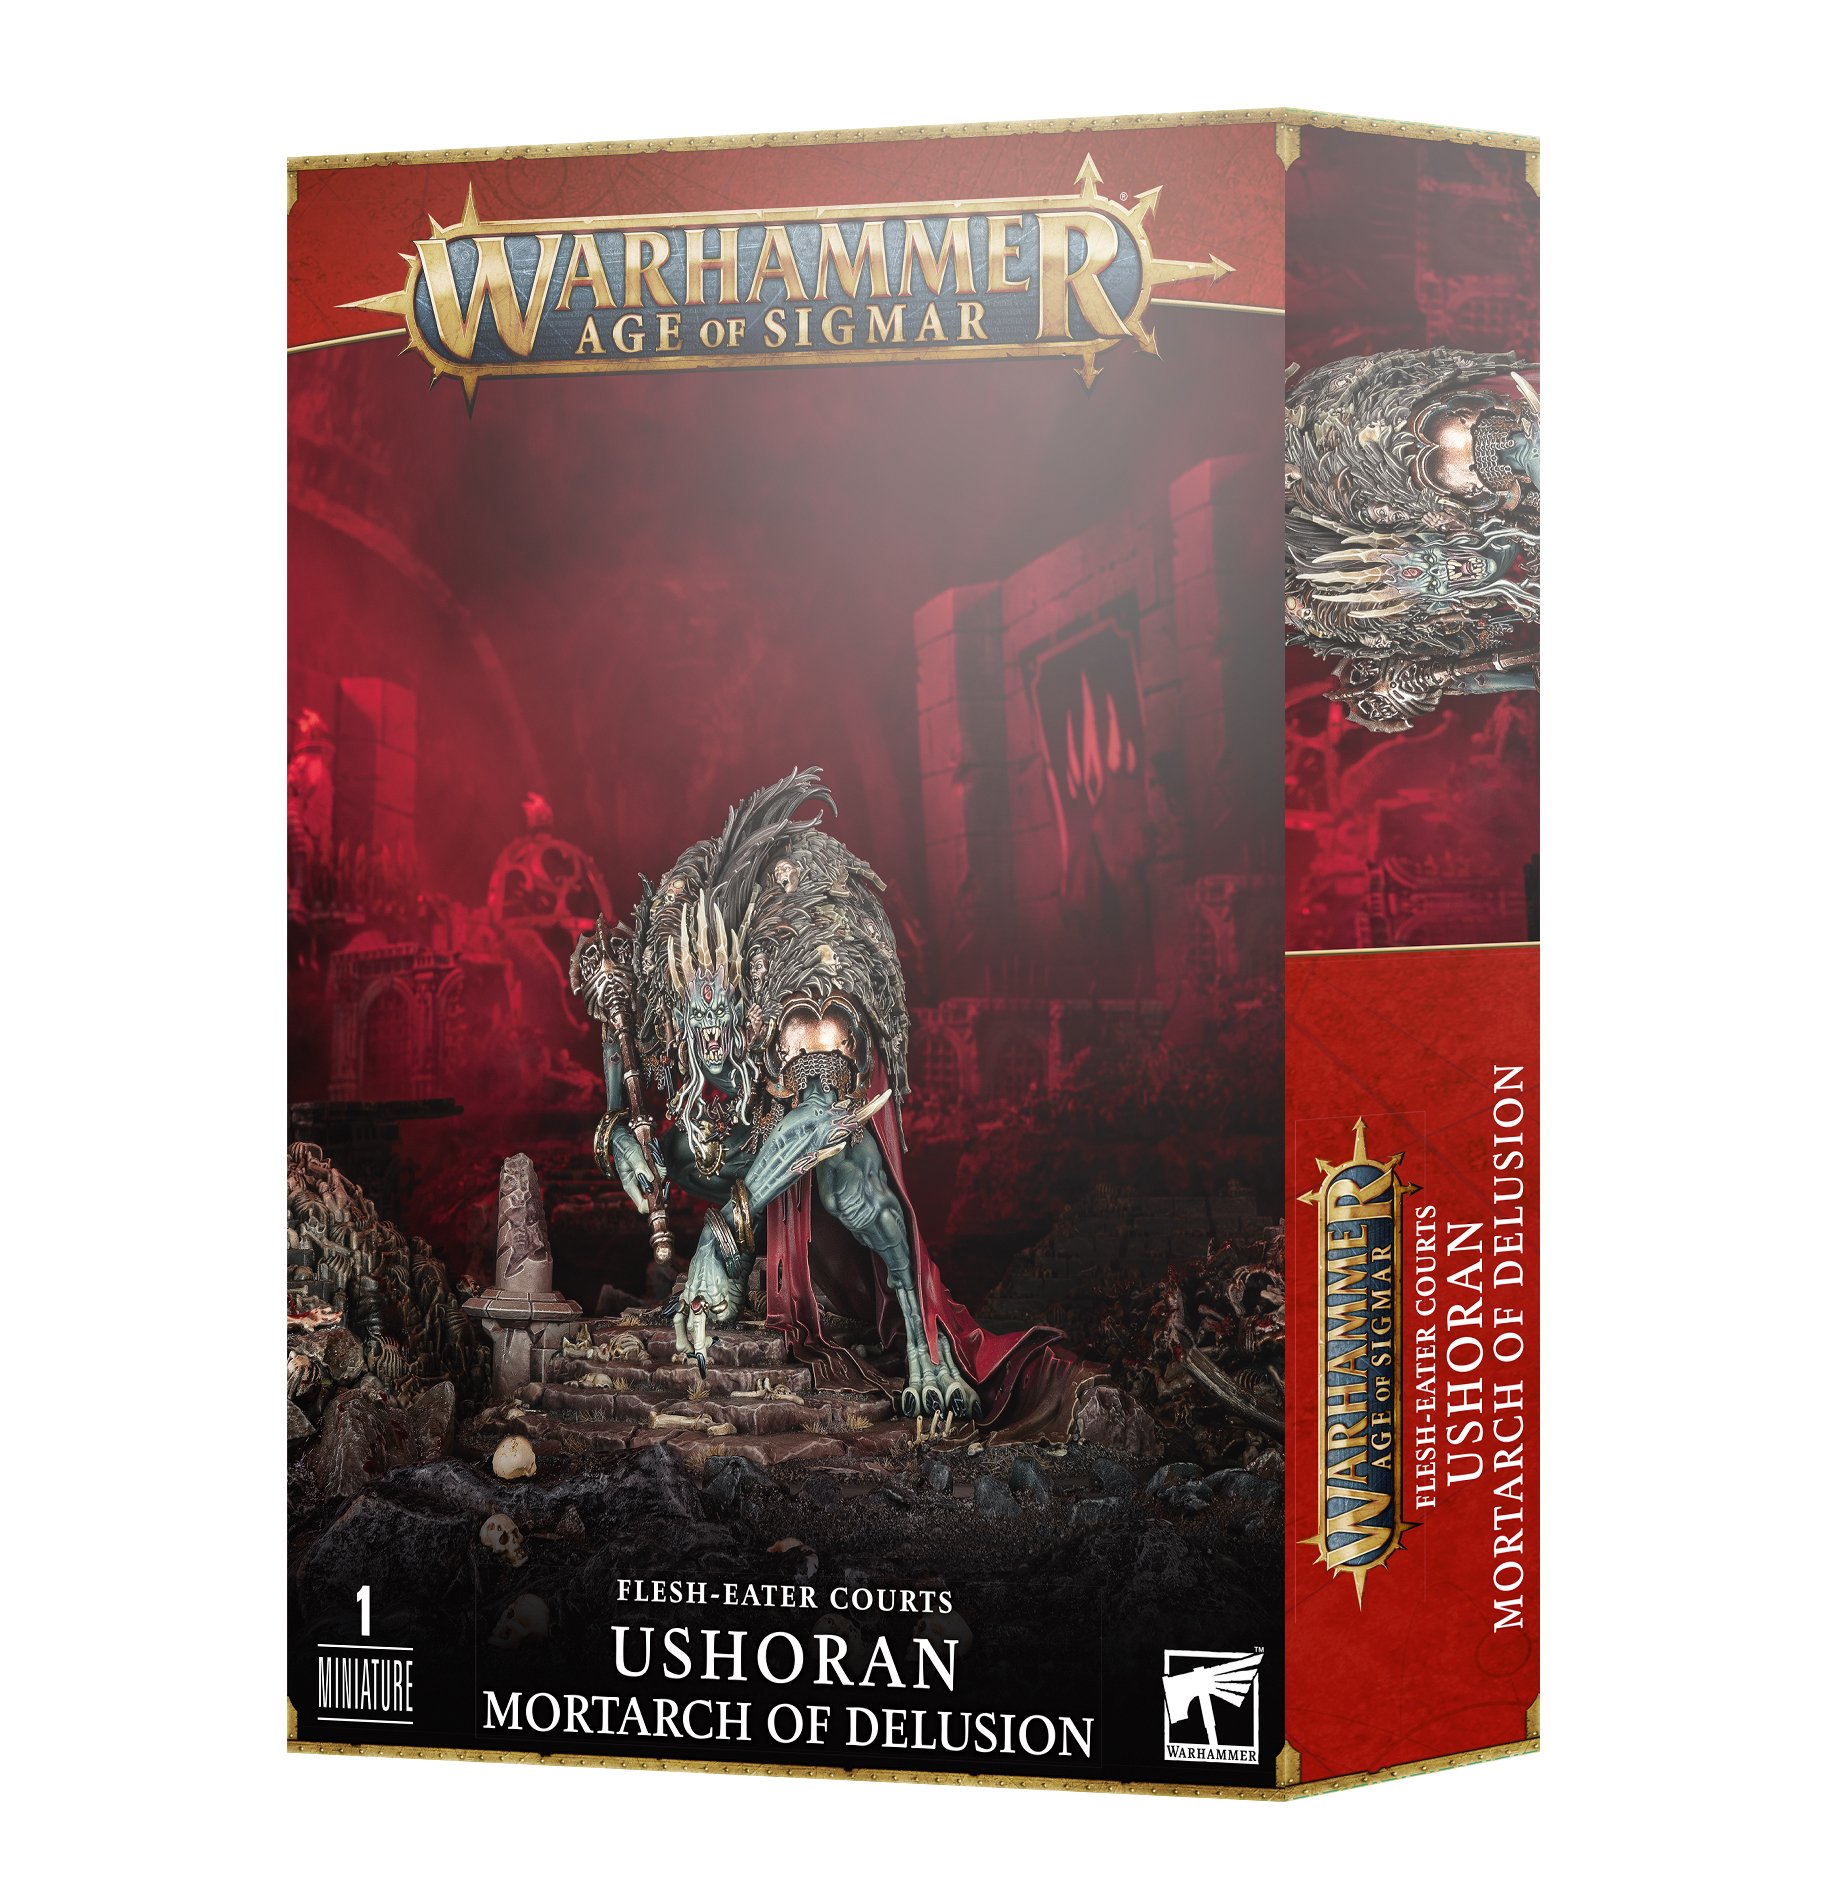 Warhammer Age of Sigmar: Flesh-Eater Courts: Ushoran Mortarch of Delusion 